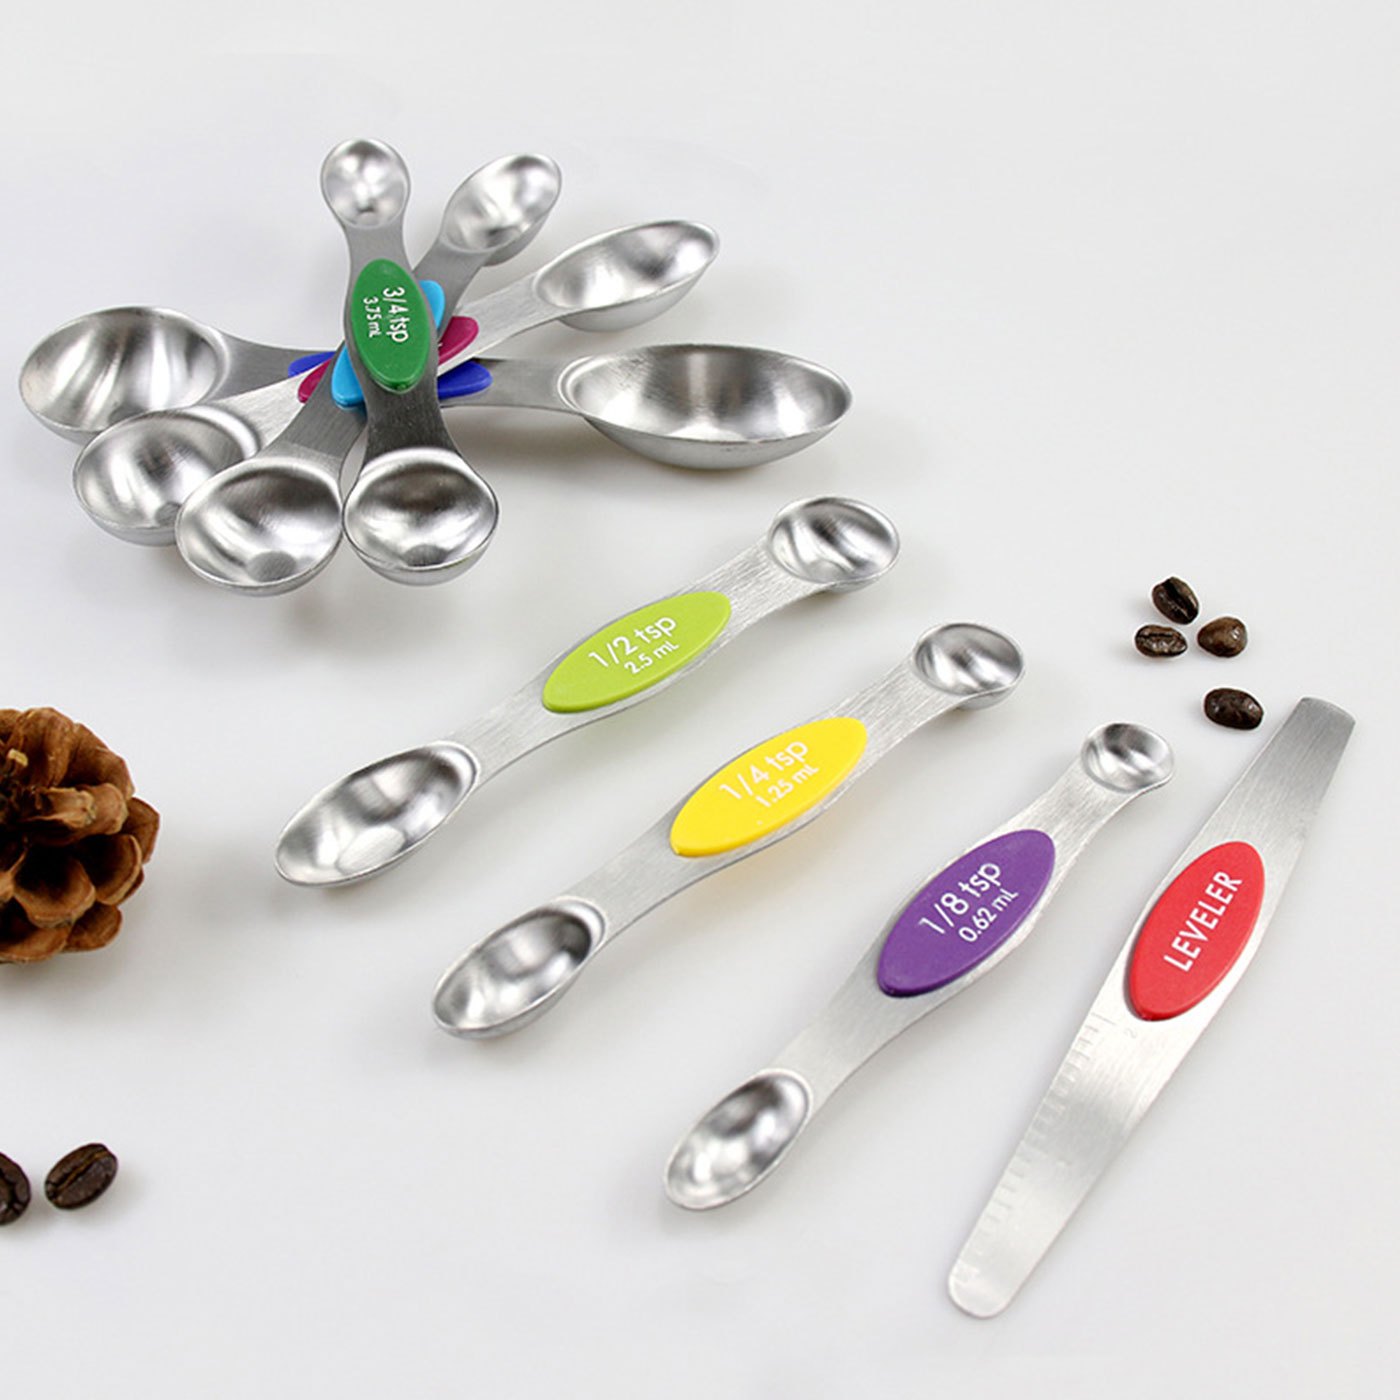 8pcs Magnetic Measuring Spoons Set, Dual Sided, Stainless Steel, Fits In Spice Jars, 6.7inch